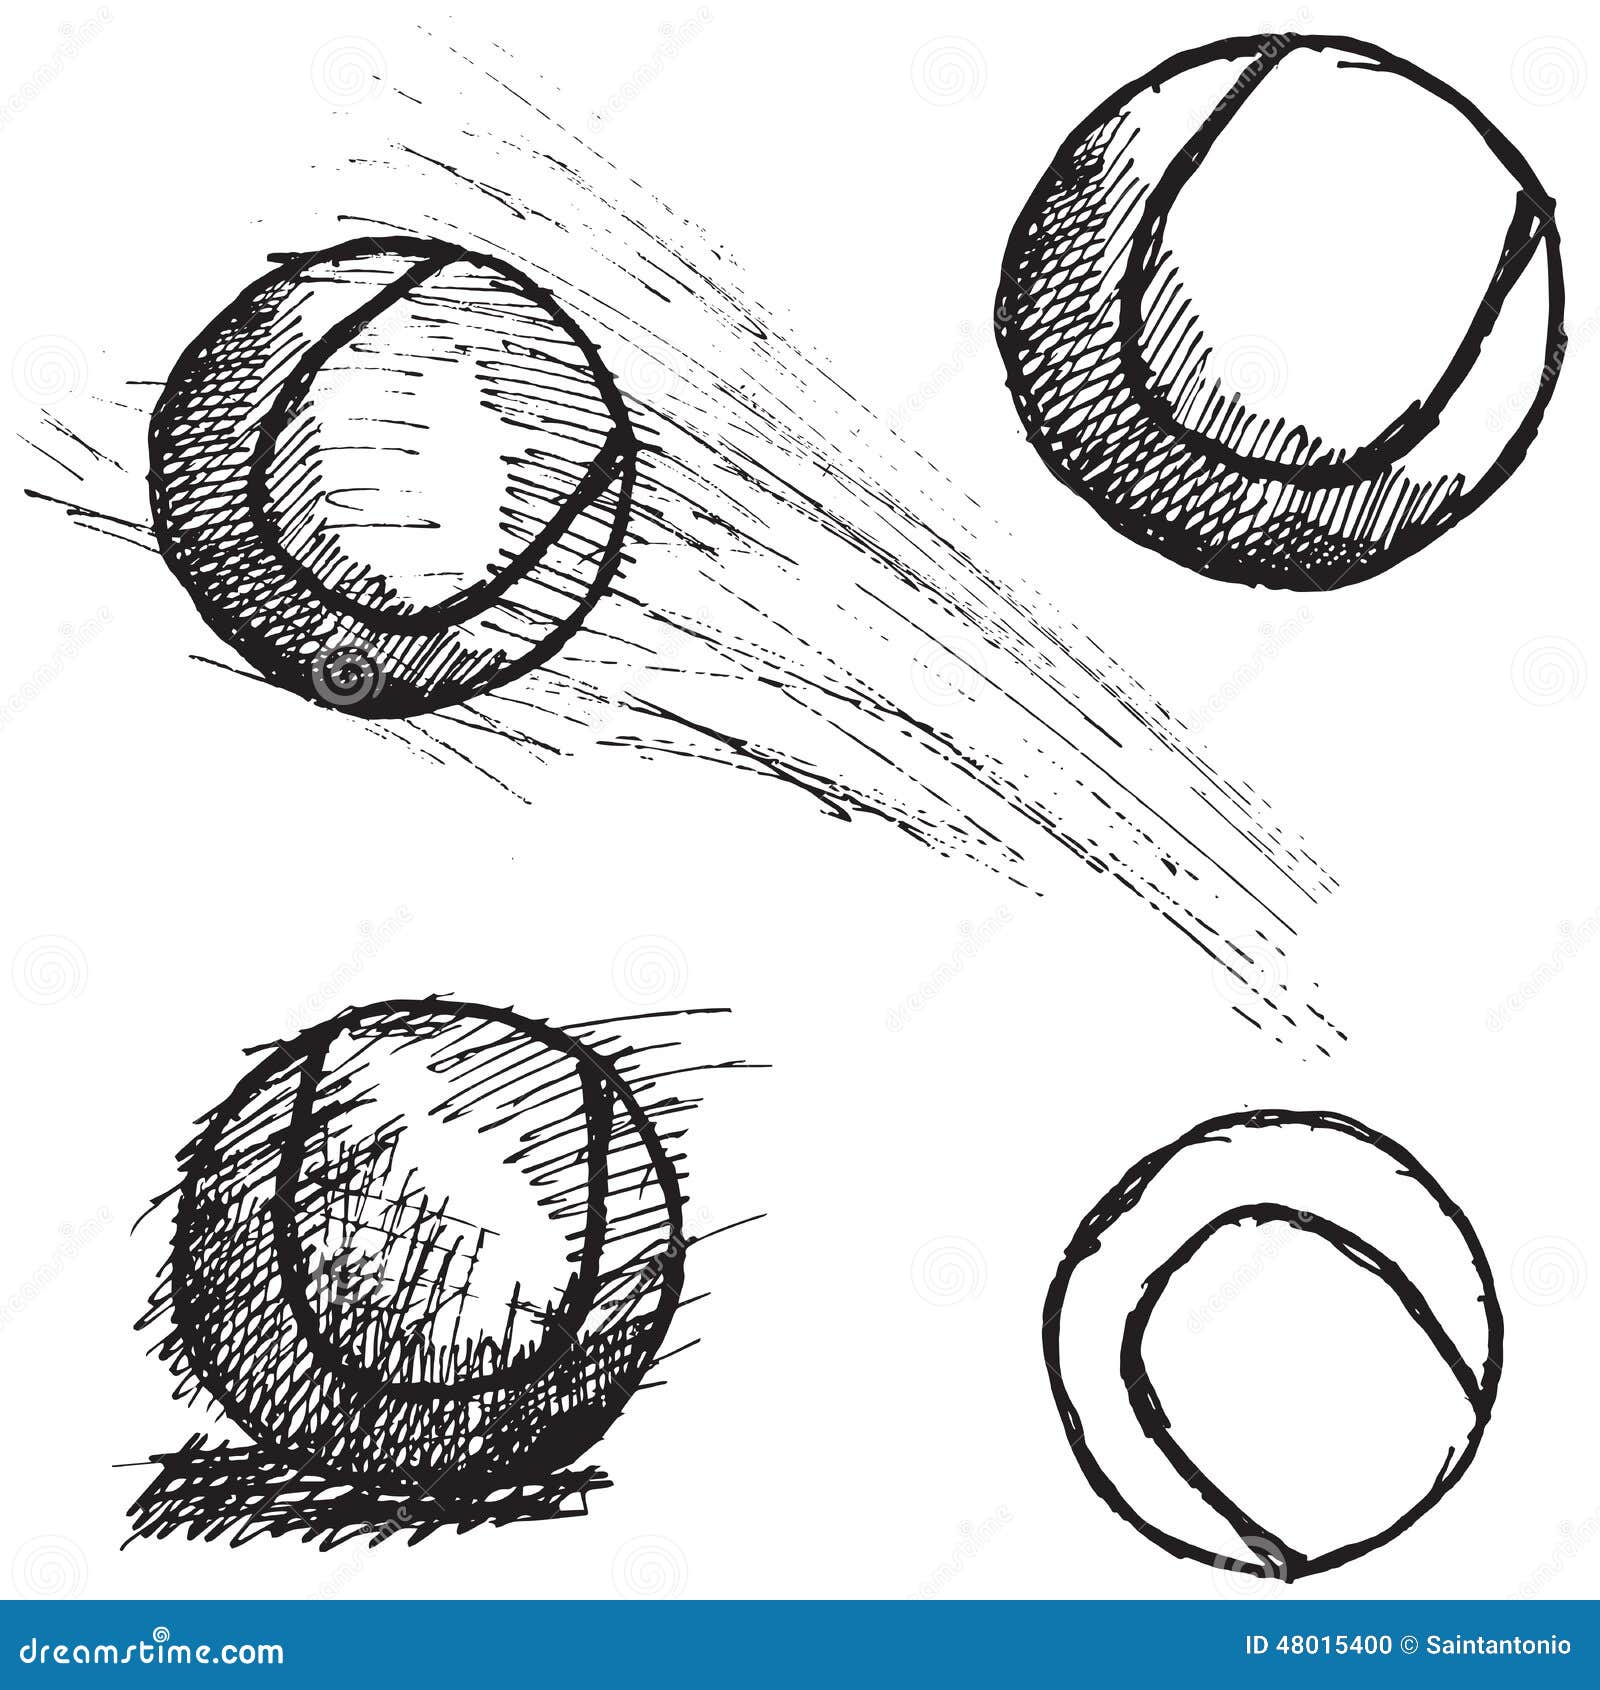 Tennis Ball Sketch Set Isolated On White Background Stock Vector